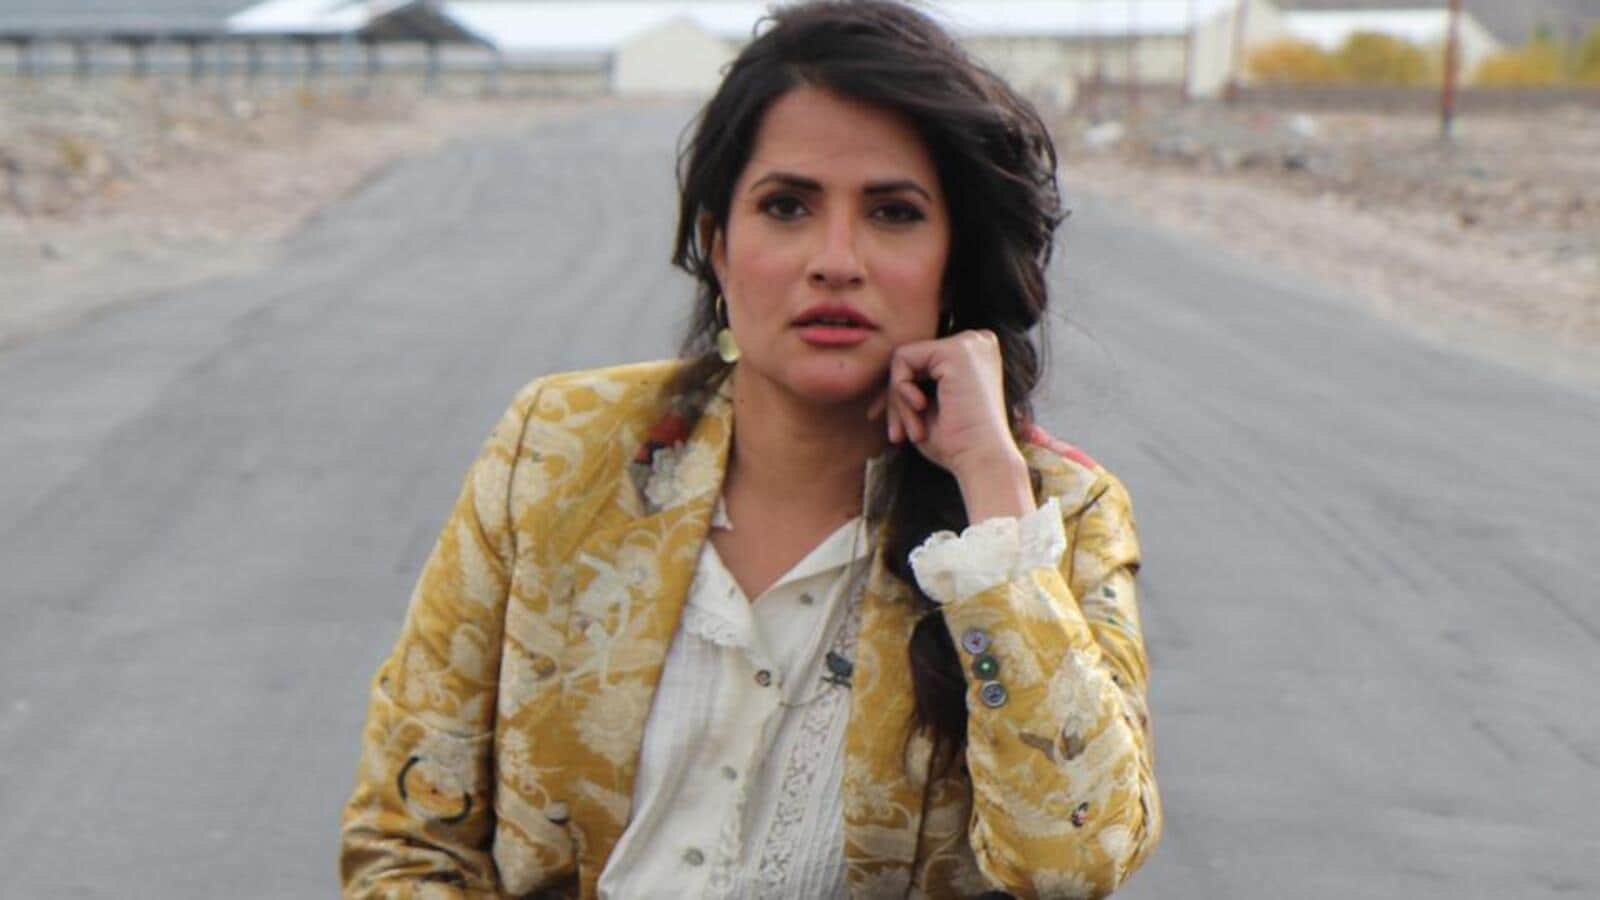 Sona Mohapatra: I’m not just a pretty face or voice, I’ve always wanted a seat at the table